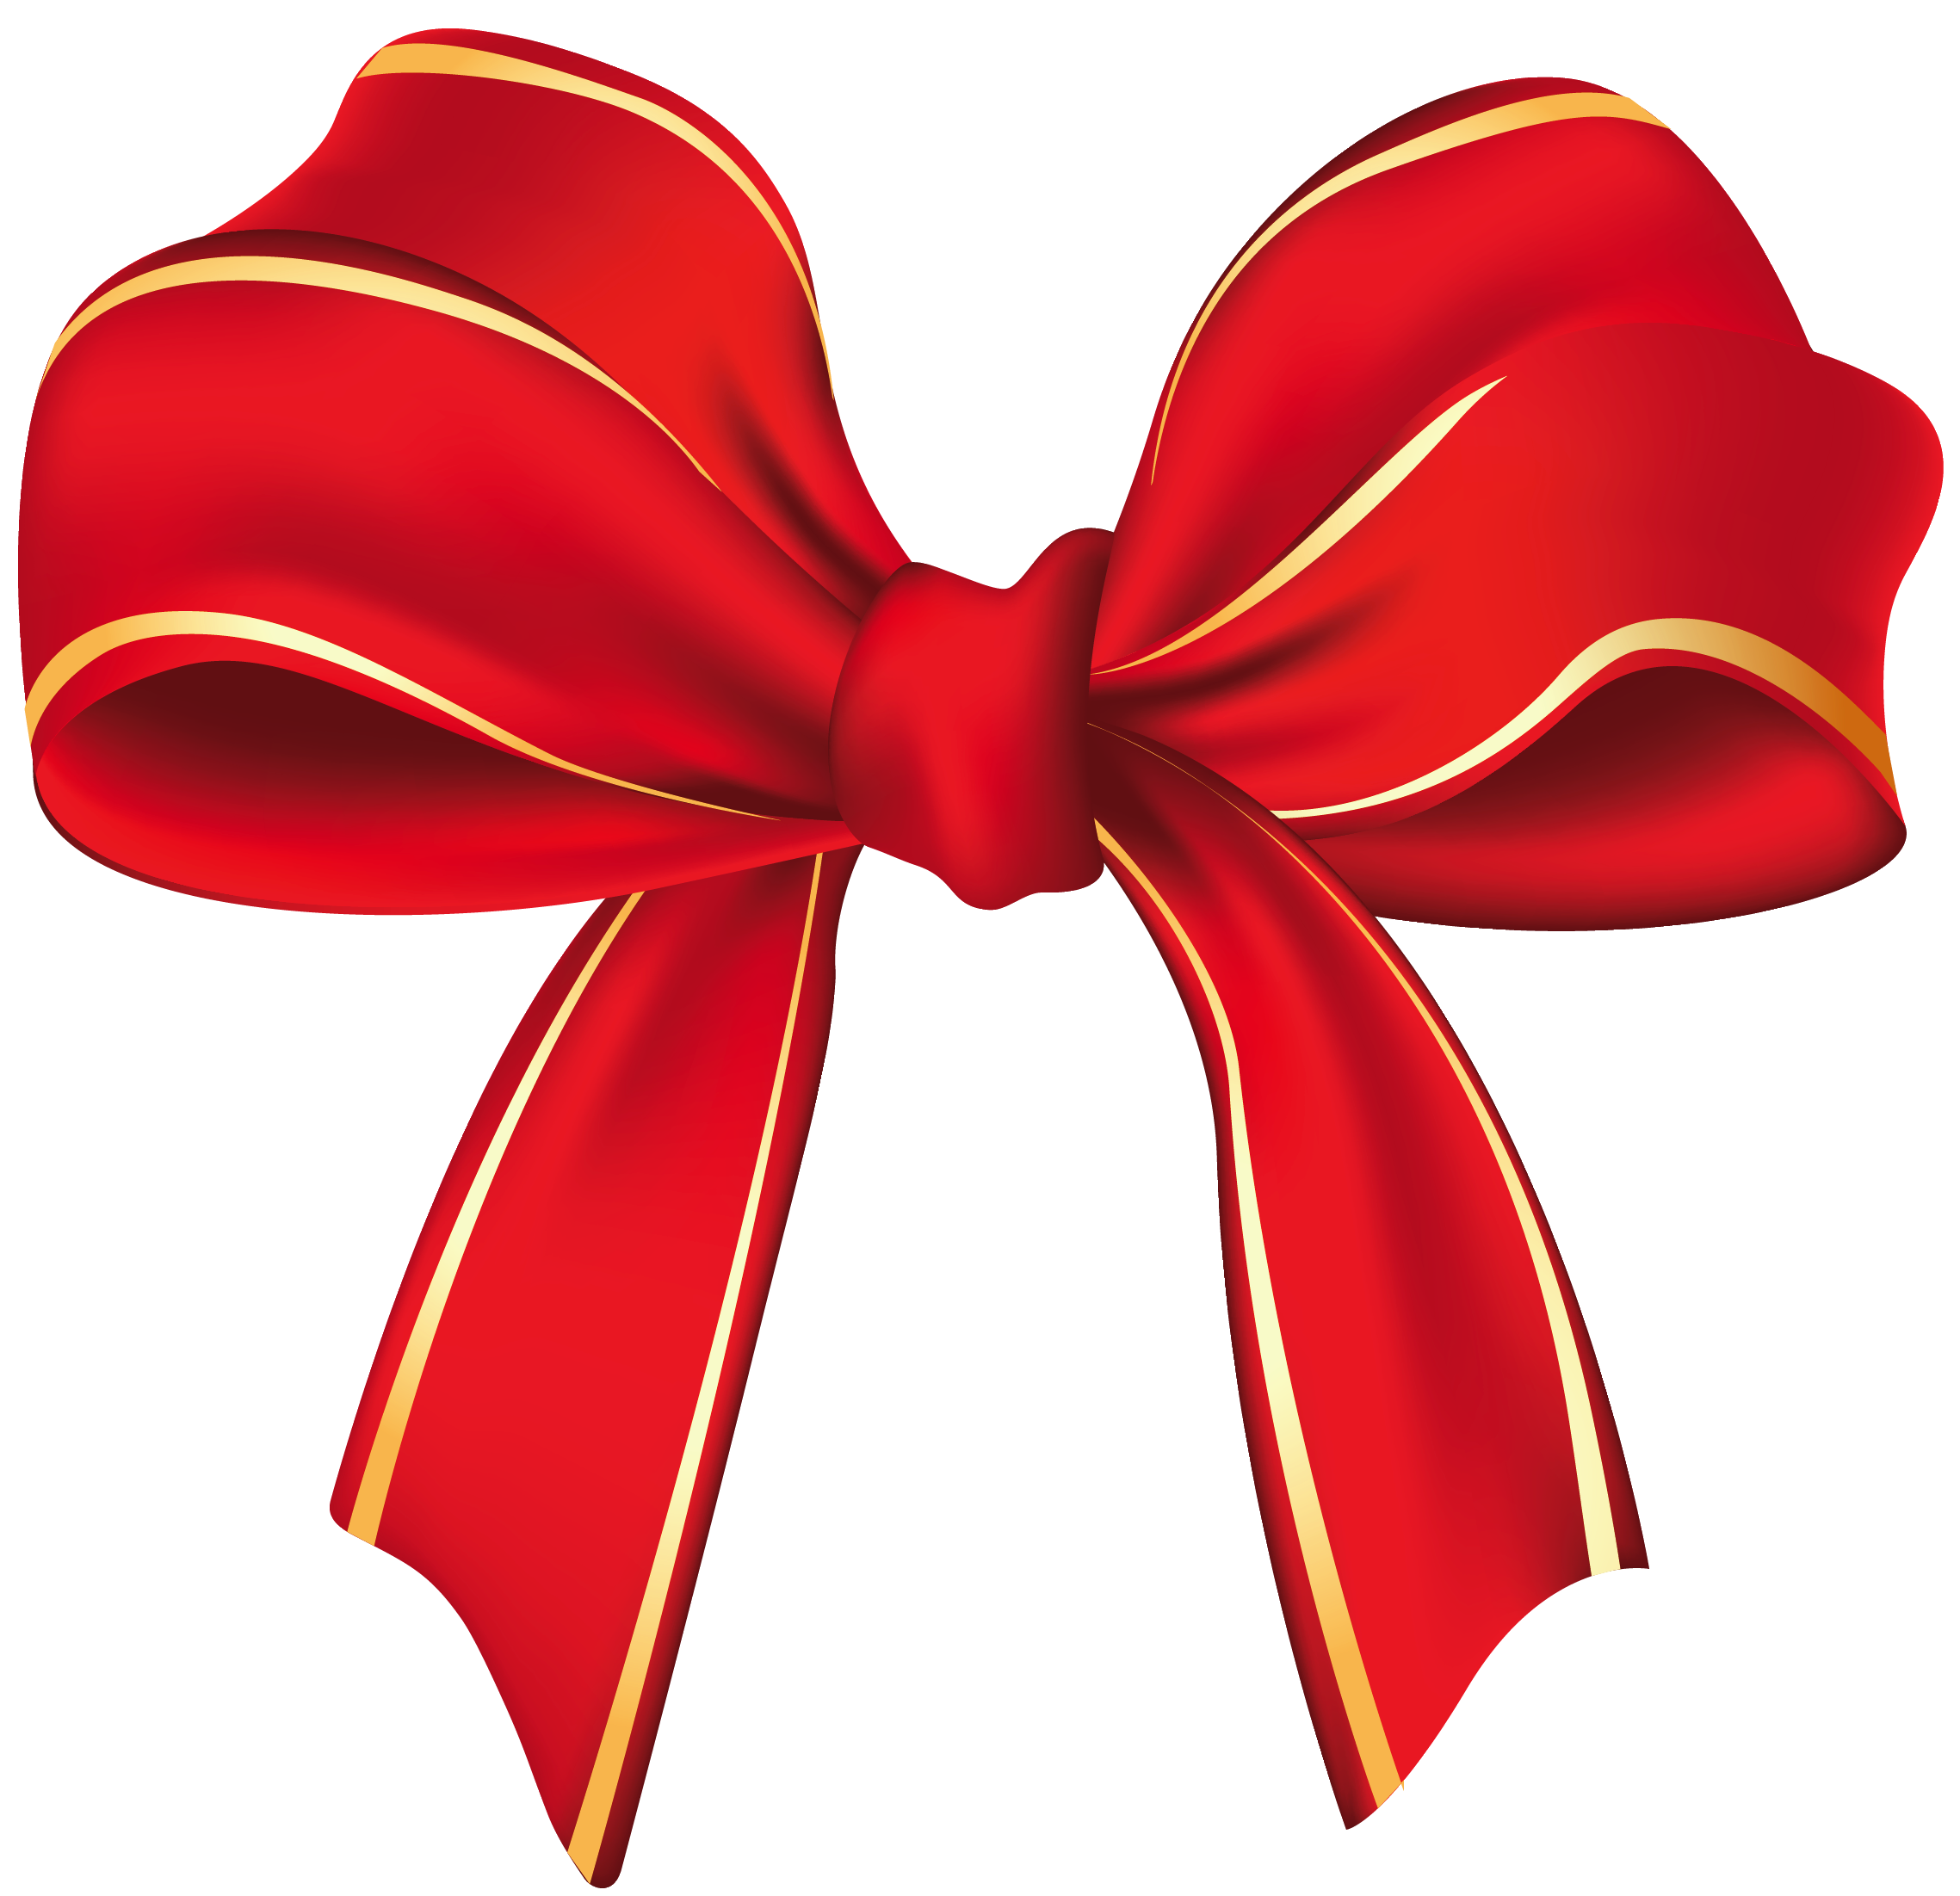 Bow clipart free clipart imag